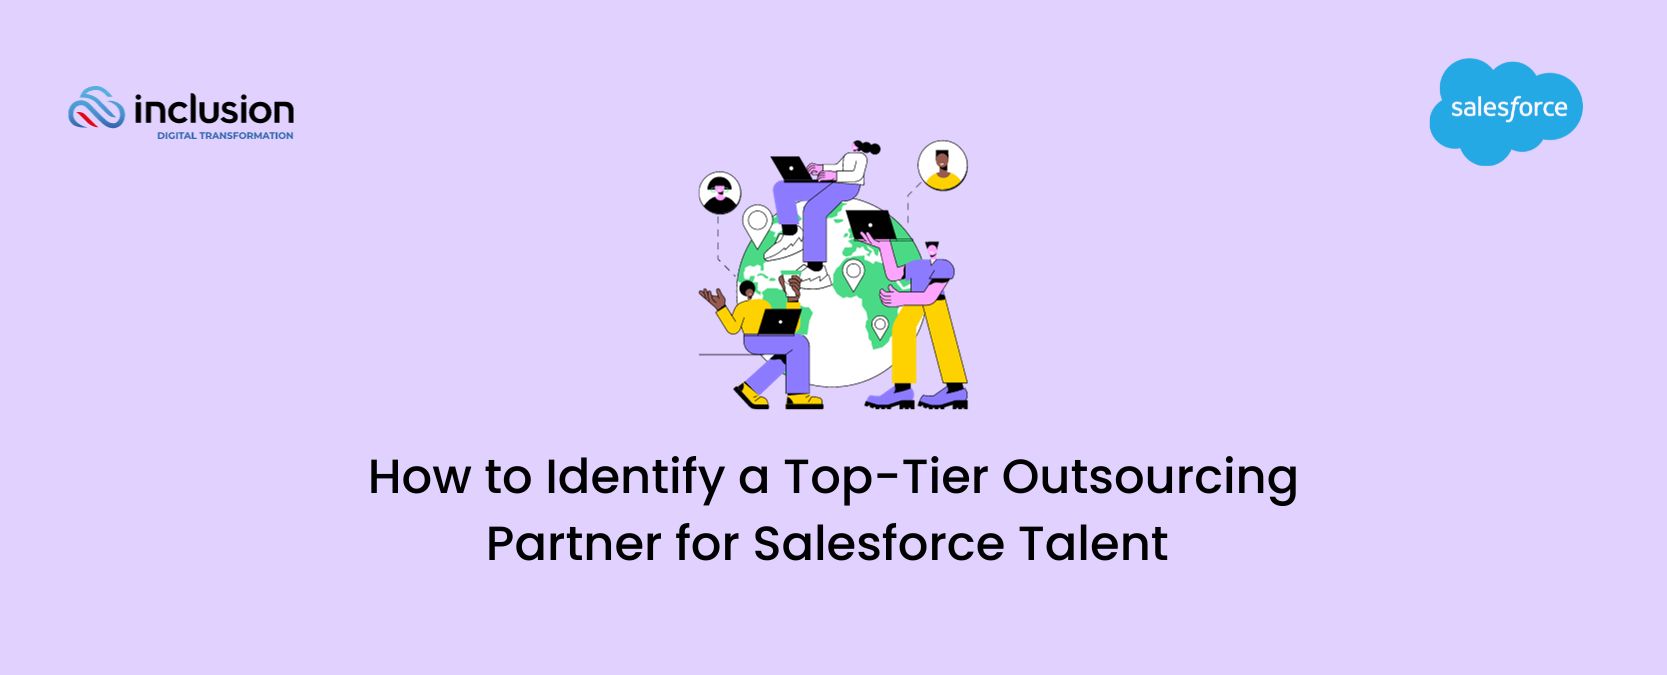 How to Identify a Top-Tier Outsourcing Partner for Salesforce Talent